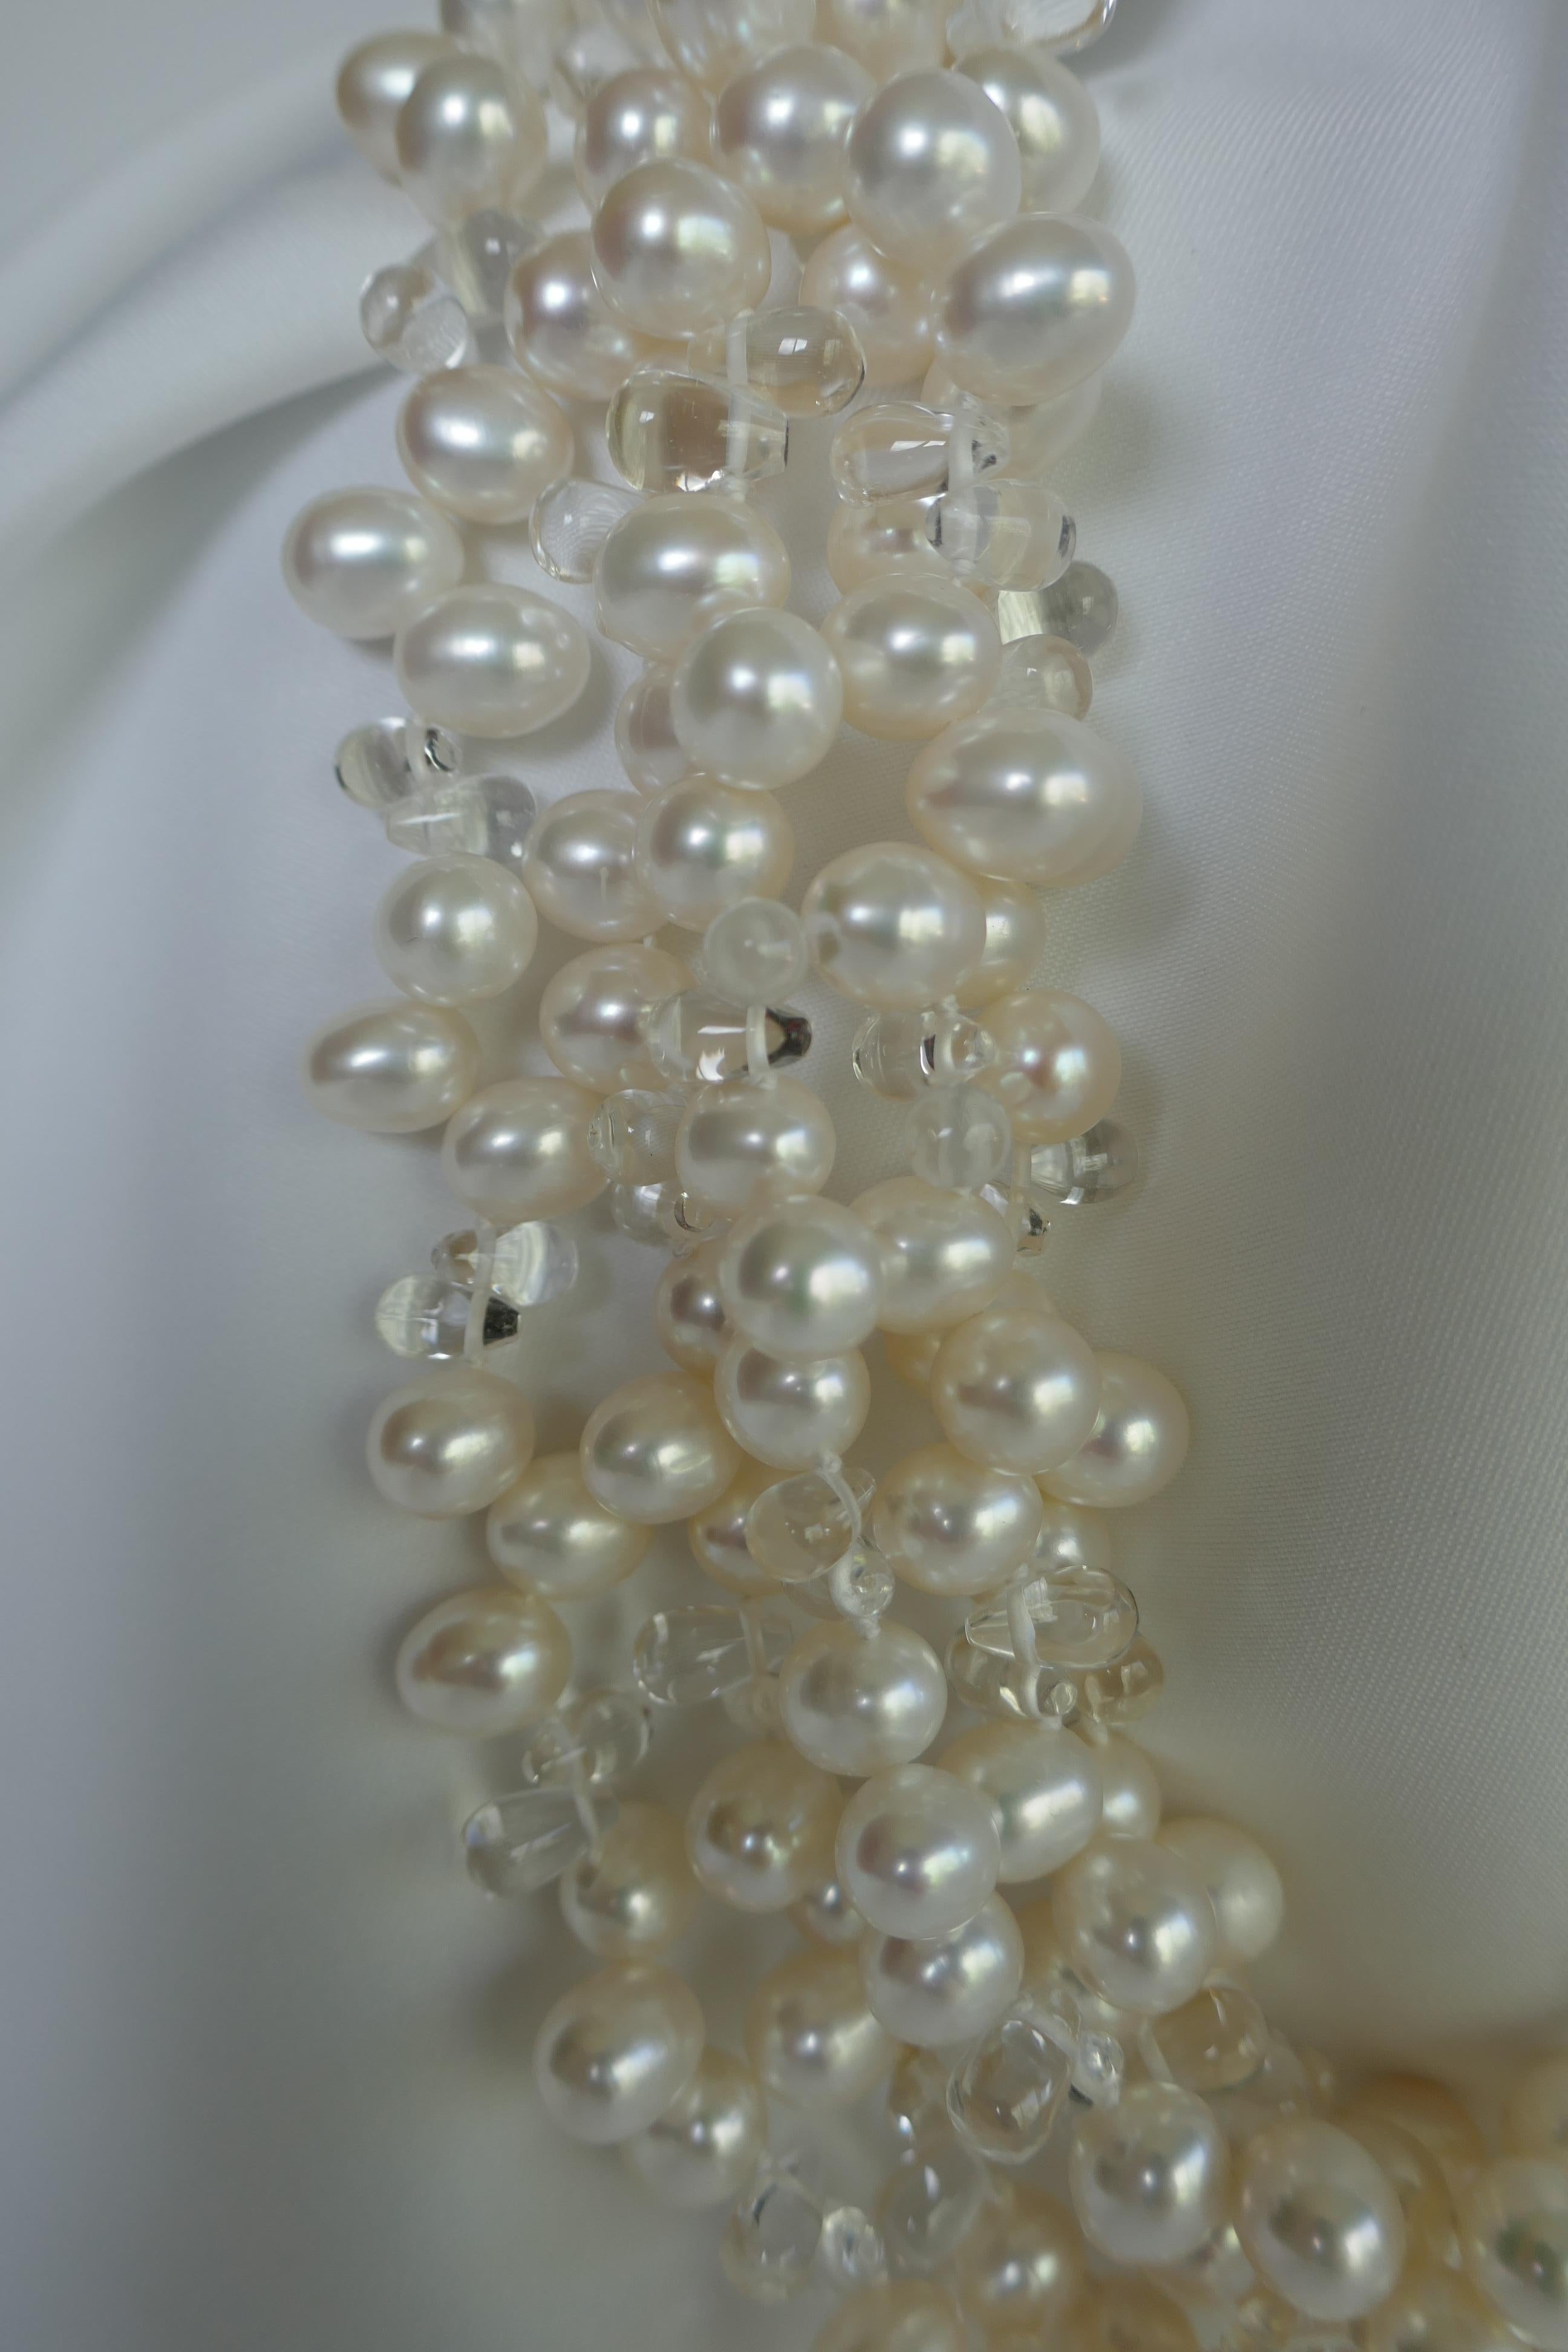 This is a five strand white cultured drop pearl necklace interspersed with rock crystal briolettes with a 925 sterling silver clasp. The cultured pearls are 8.5mm-9mm. The pearls have great luster and very little blemishes. It is strung on white